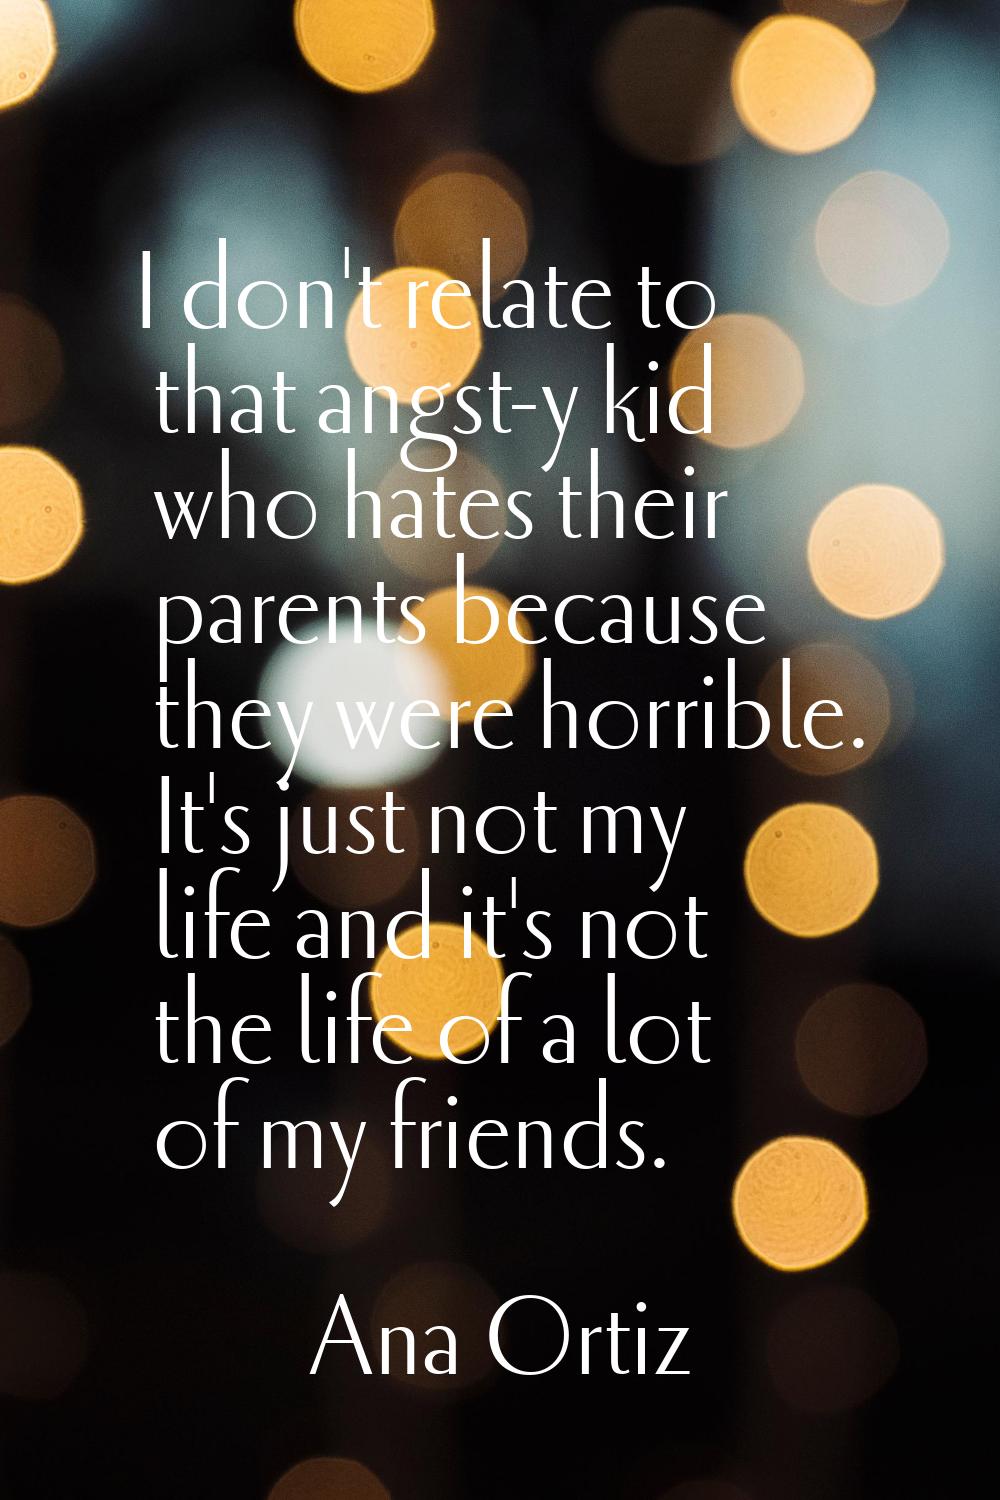 I don't relate to that angst-y kid who hates their parents because they were horrible. It's just no